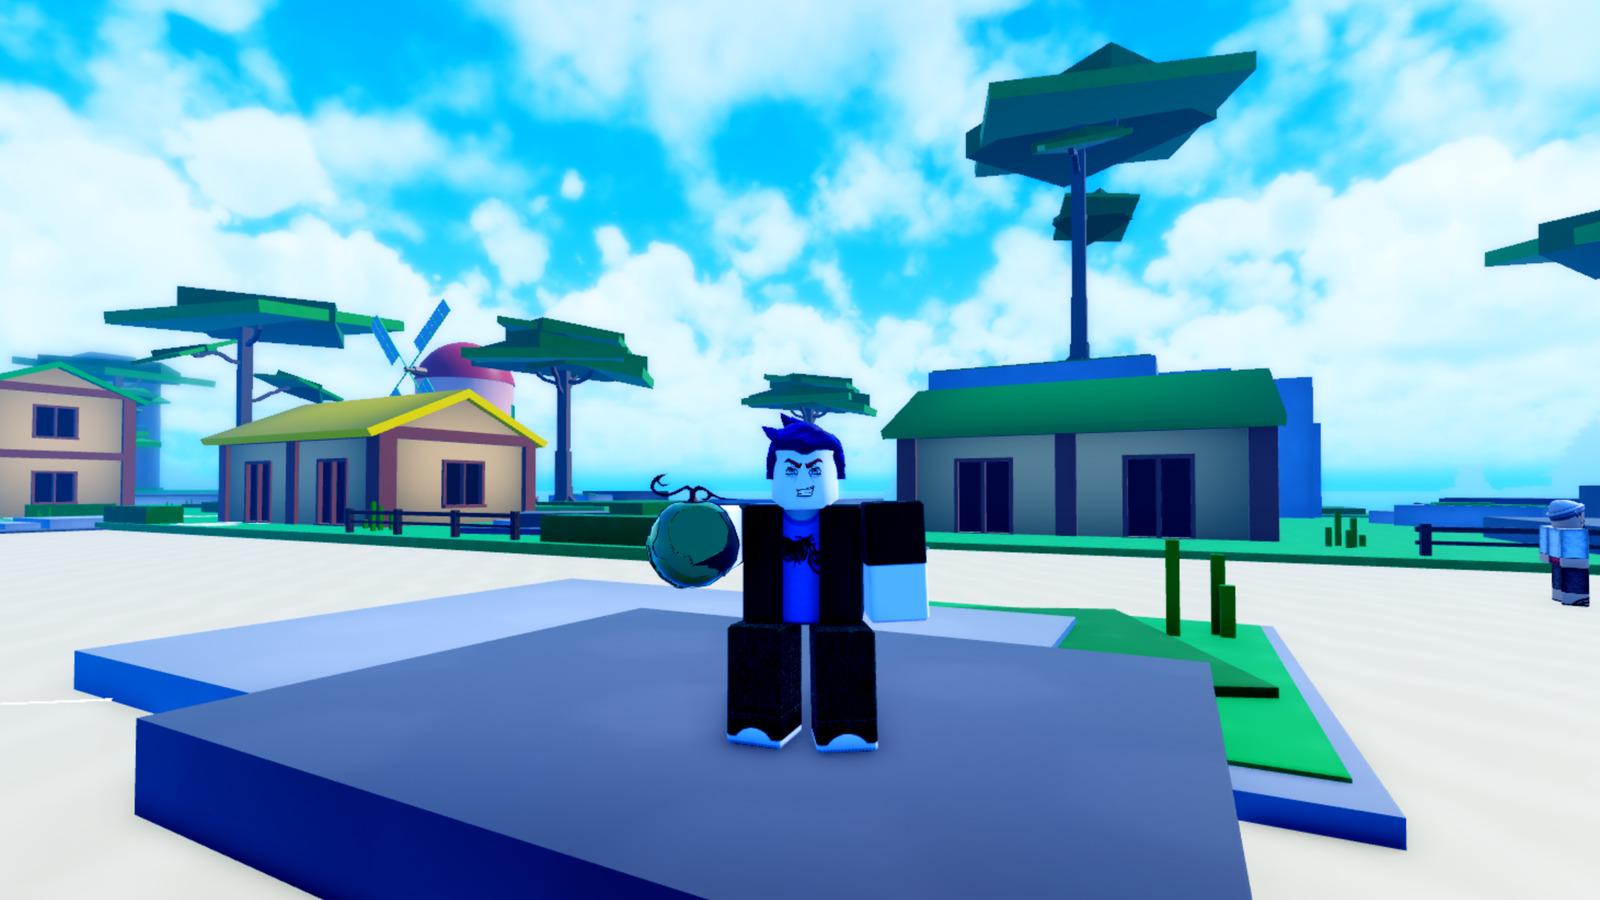 block holding a fruit in One fruit simulator roblox